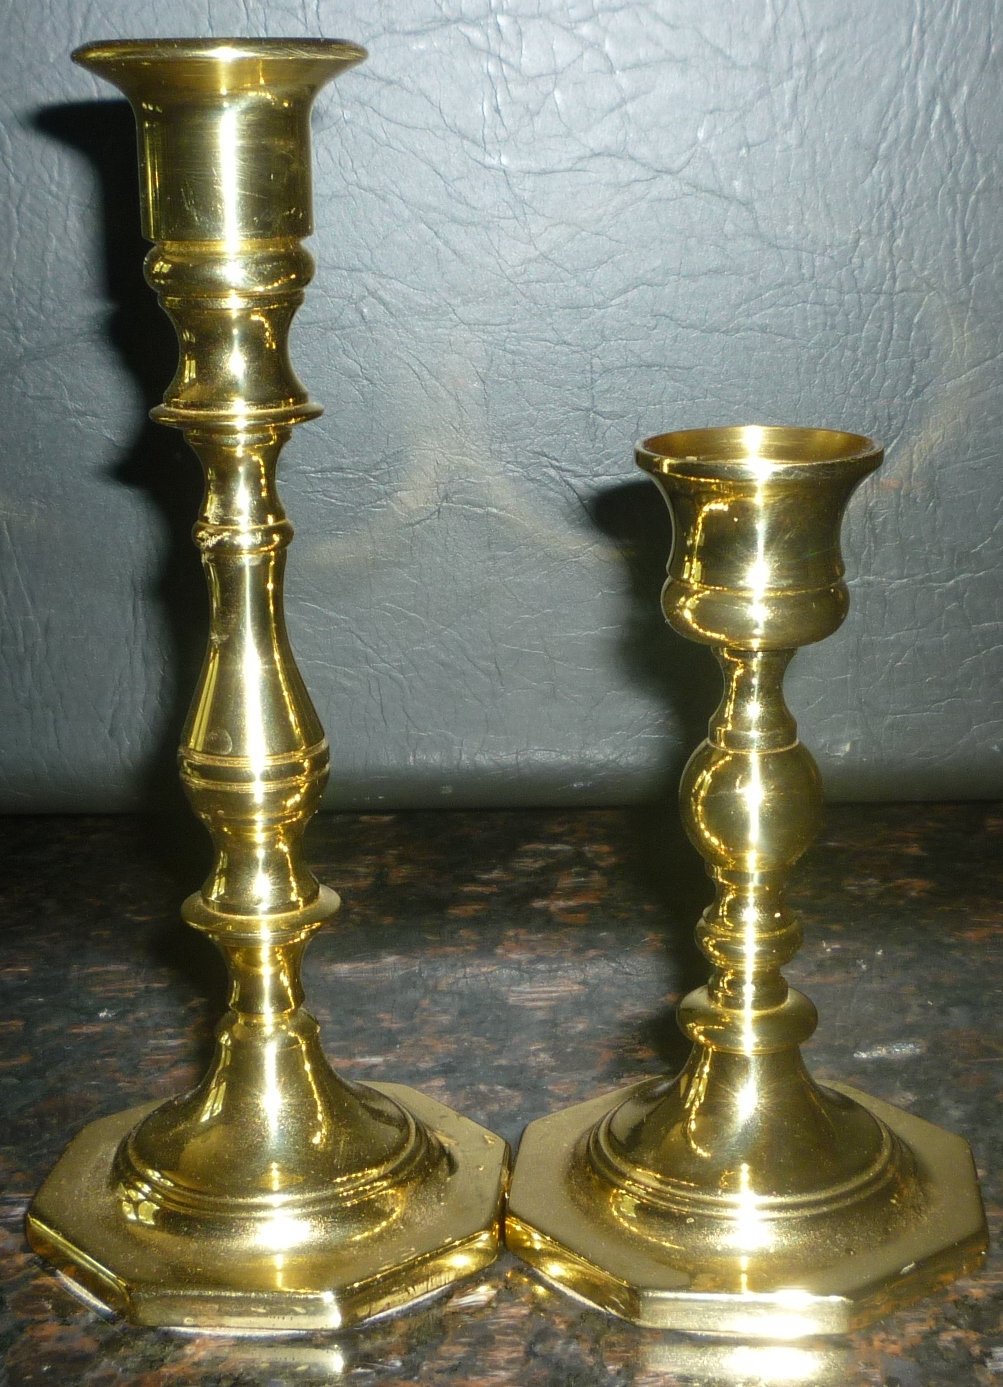 VINTAGE SOLID BRASS BALDWIN MULTI SIZE SET OF 2 CANDLE HOLDERS CANDLEHOLDERS